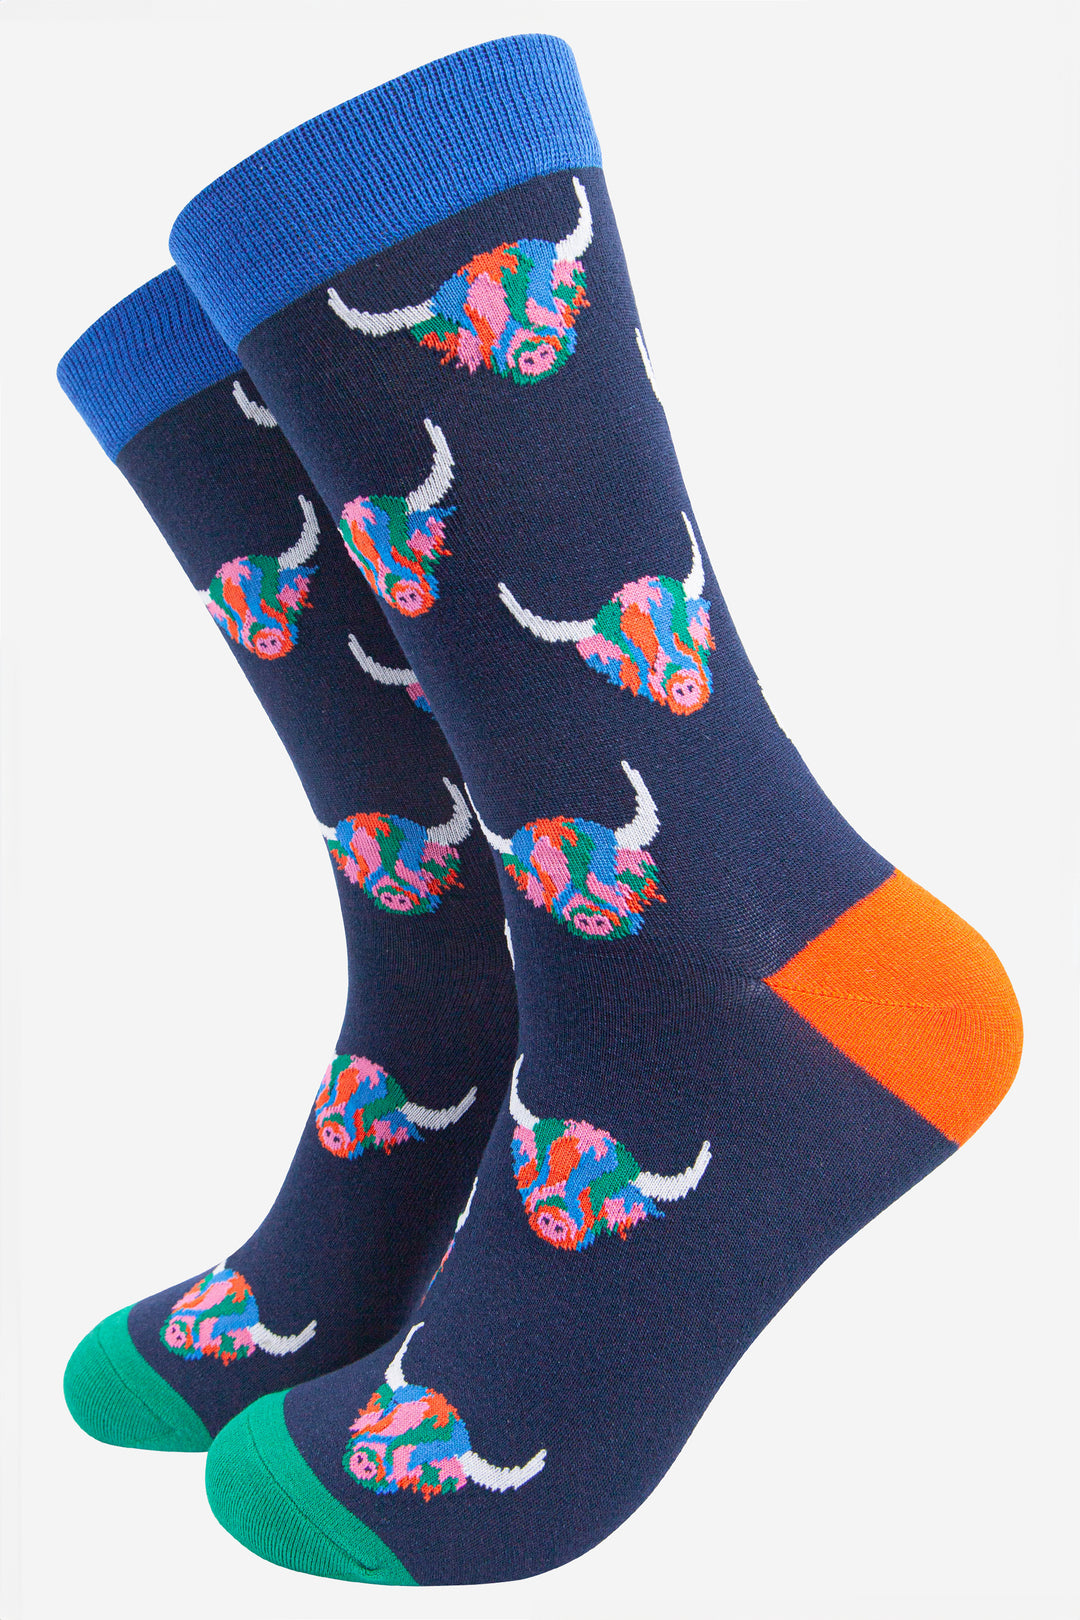 navy blue socks with a pattern of rainbow highland cows